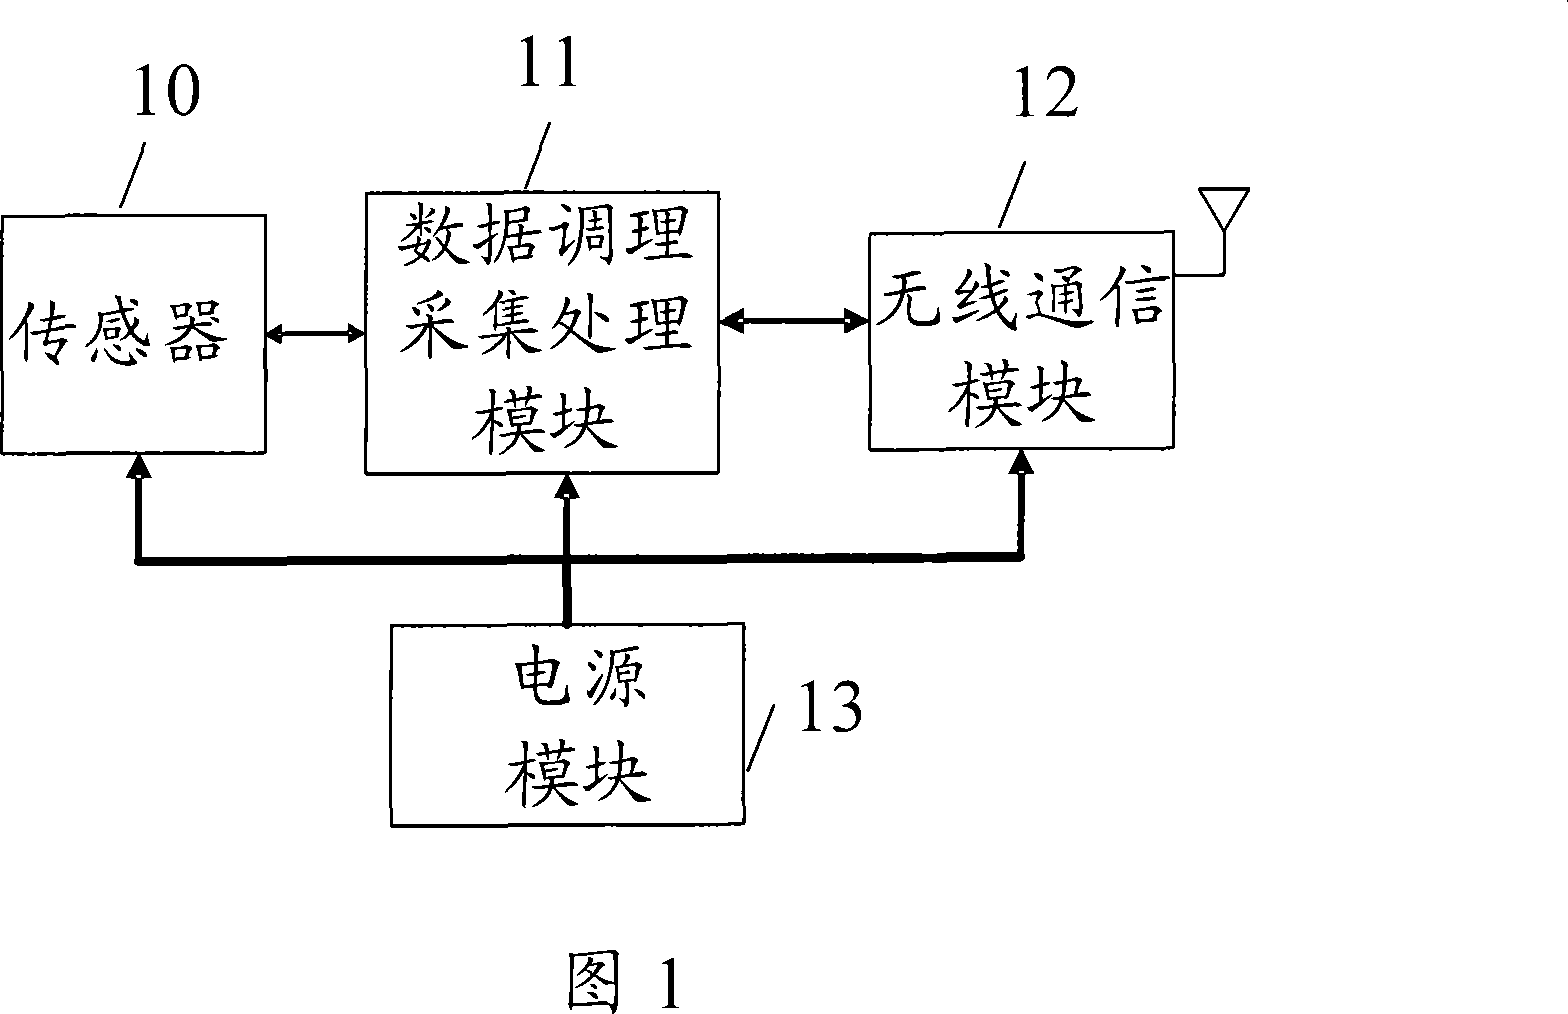 Apparatus for realizing low-consumption wireless monitor